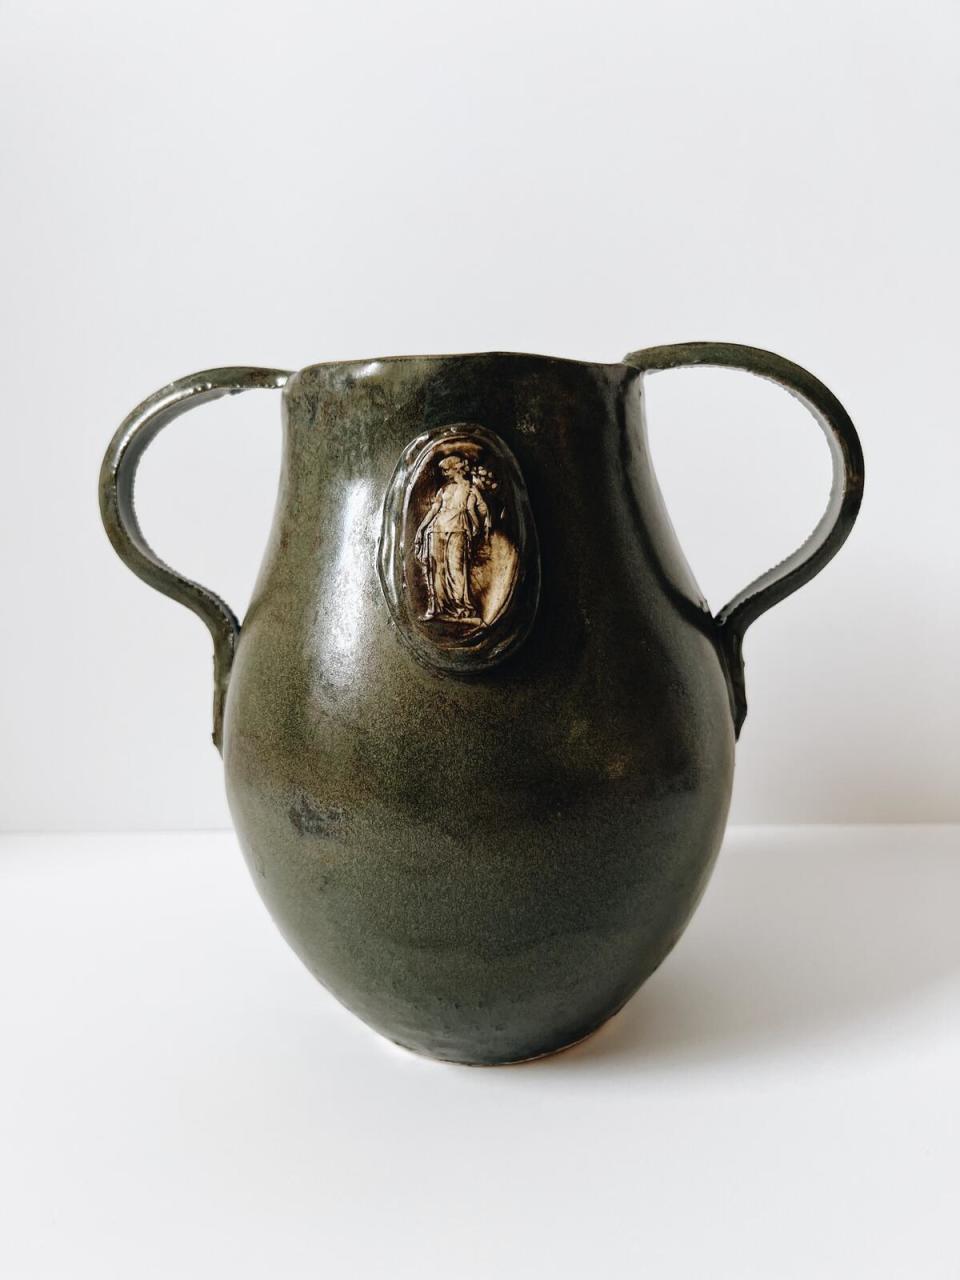 The Artemis vase with handles by Jeanette Morrow for The Huntress